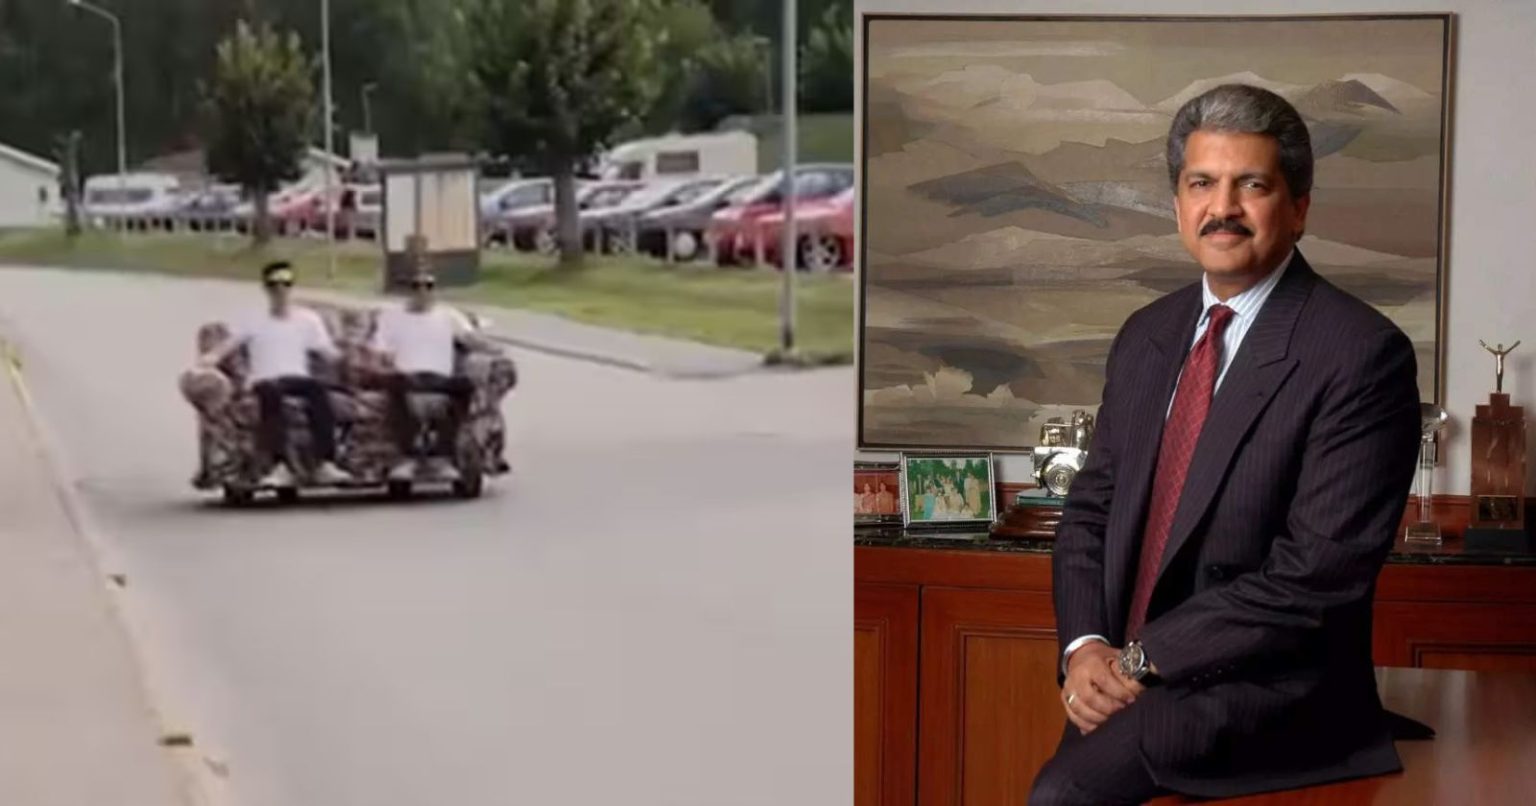 Anand Mahindra's Perfect Reaction To A Video When A Man Converts A Sofa To A Vehicle